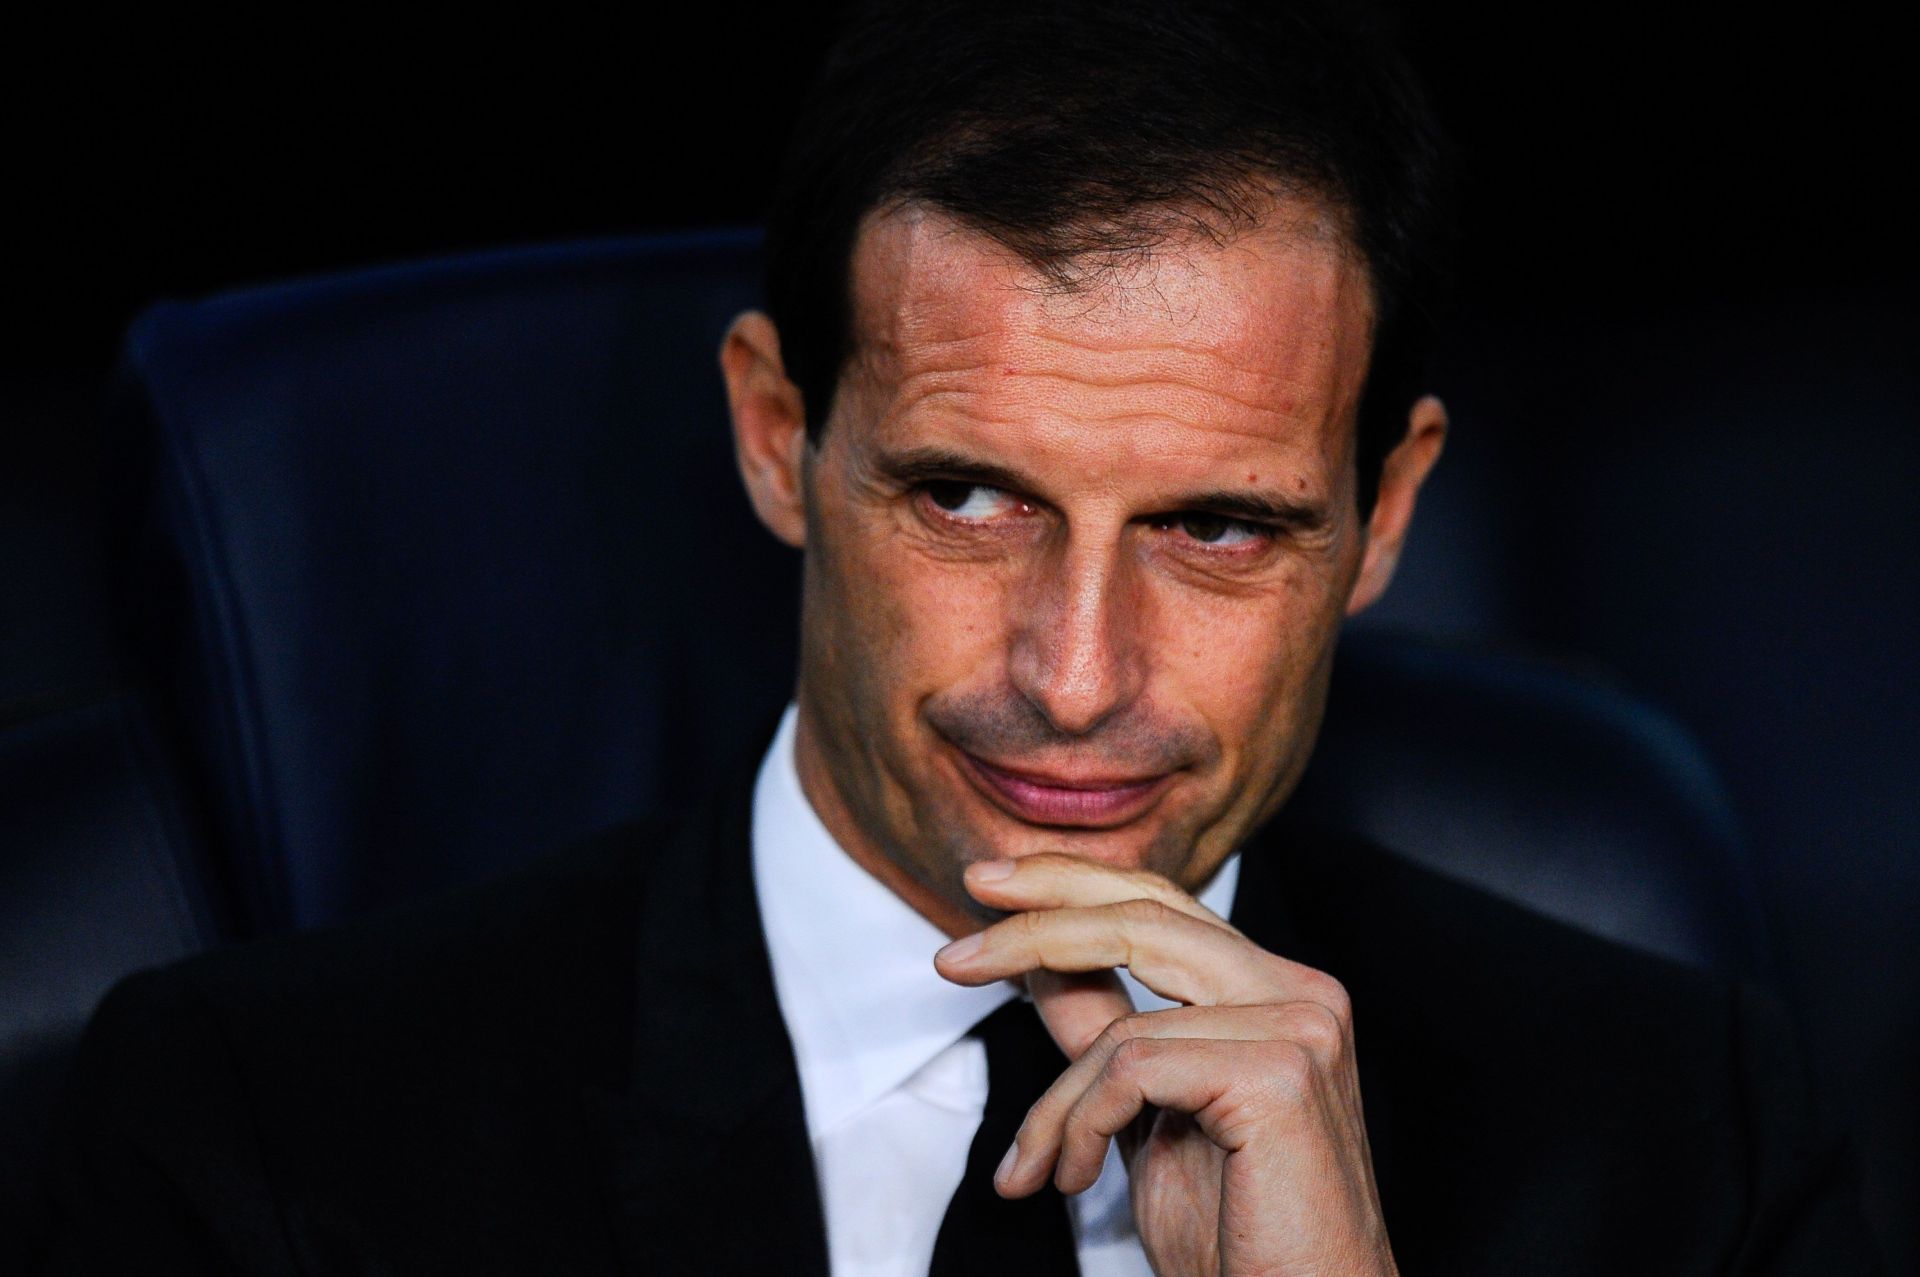 Massimiliano Allegri would be pulling off an astute deal.